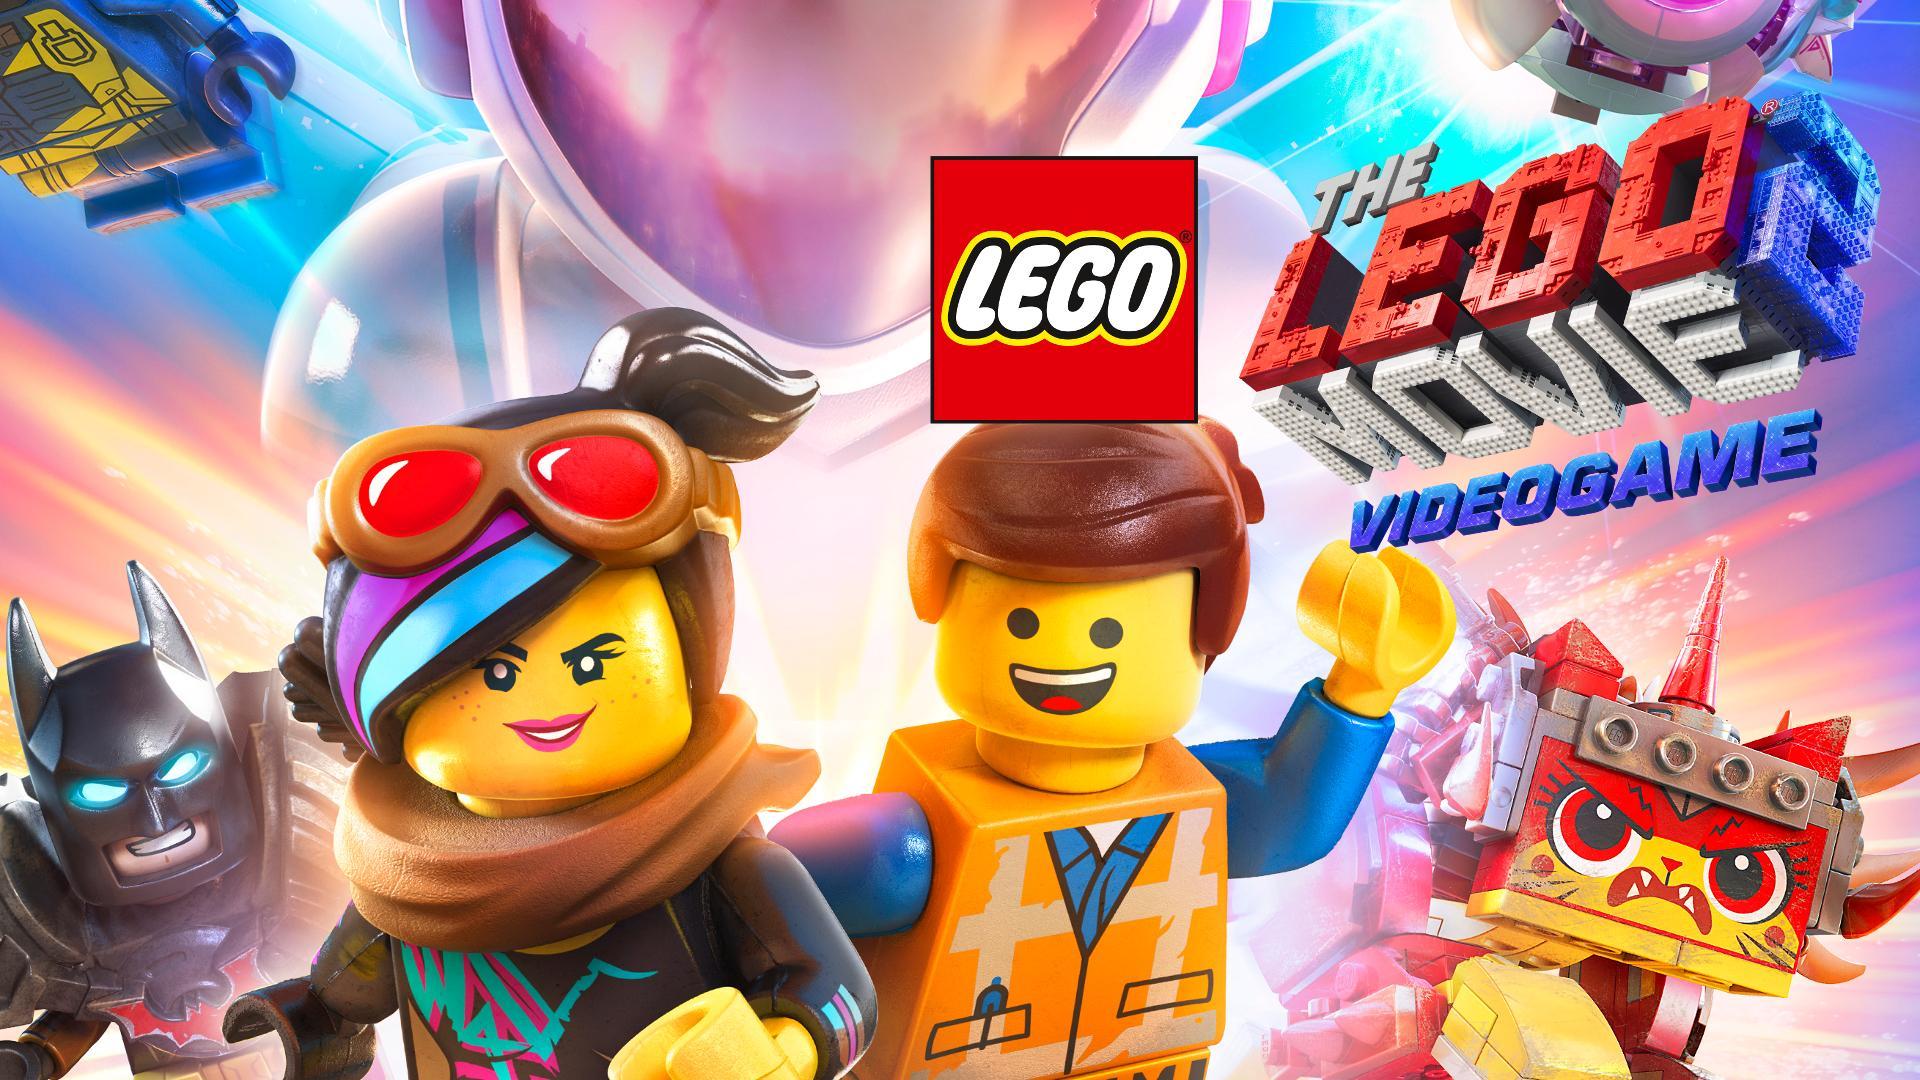 The LEGO Movie 2 Video Game Announced In Brick